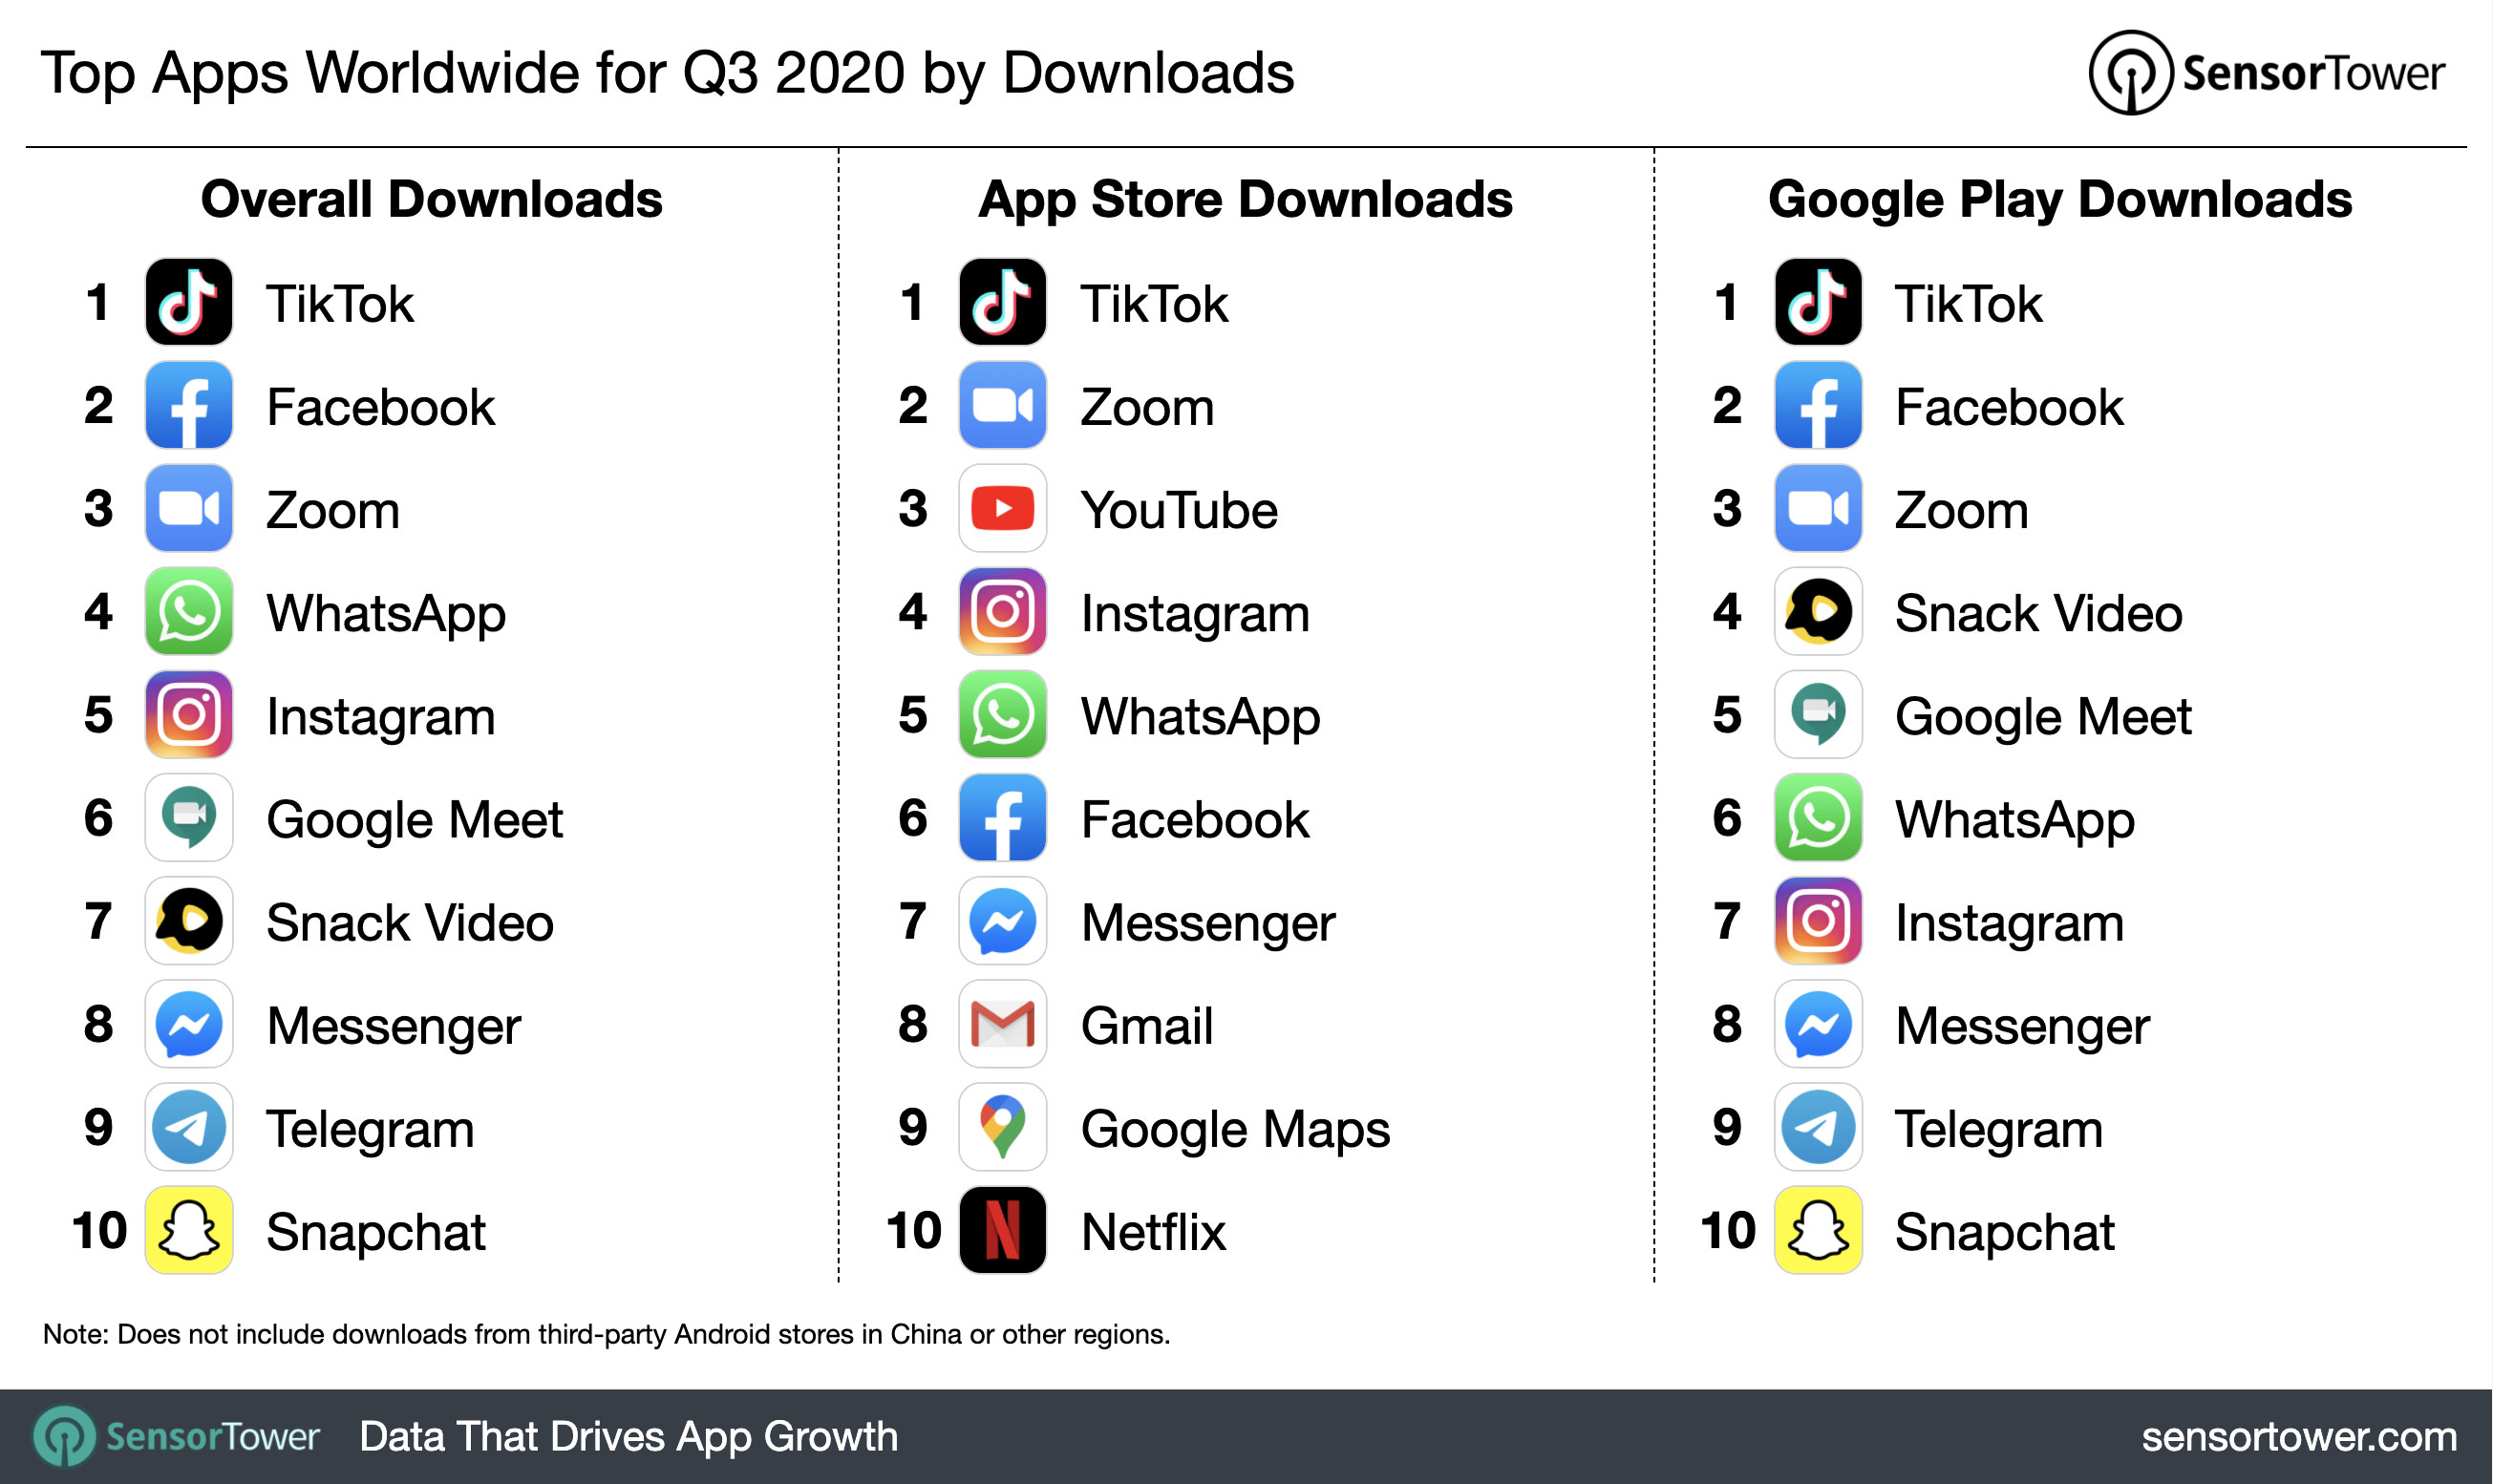 Q3 2020 Most Downloaded Apps Worldwide